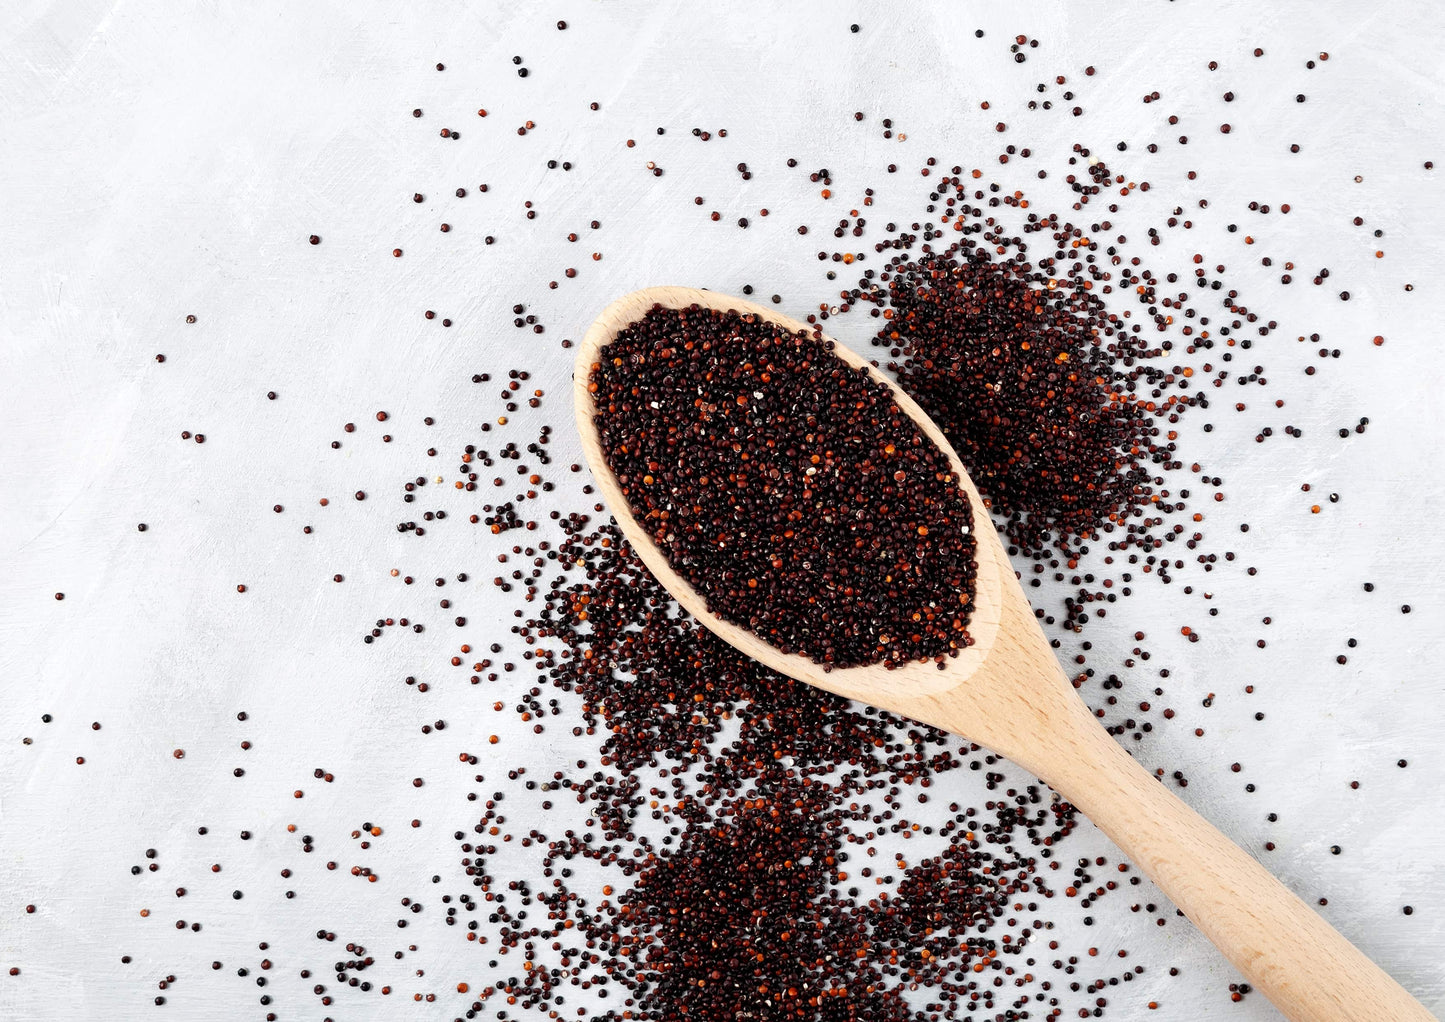 Black Quinoa – Whole Grain, Raw, Vegan, Sirtfood, Bulk. Easy to Cook. Good Source of Fiber, Plant-Based Protein. Perfect for Salads, Soups, Stews. Great Alternative to Rice